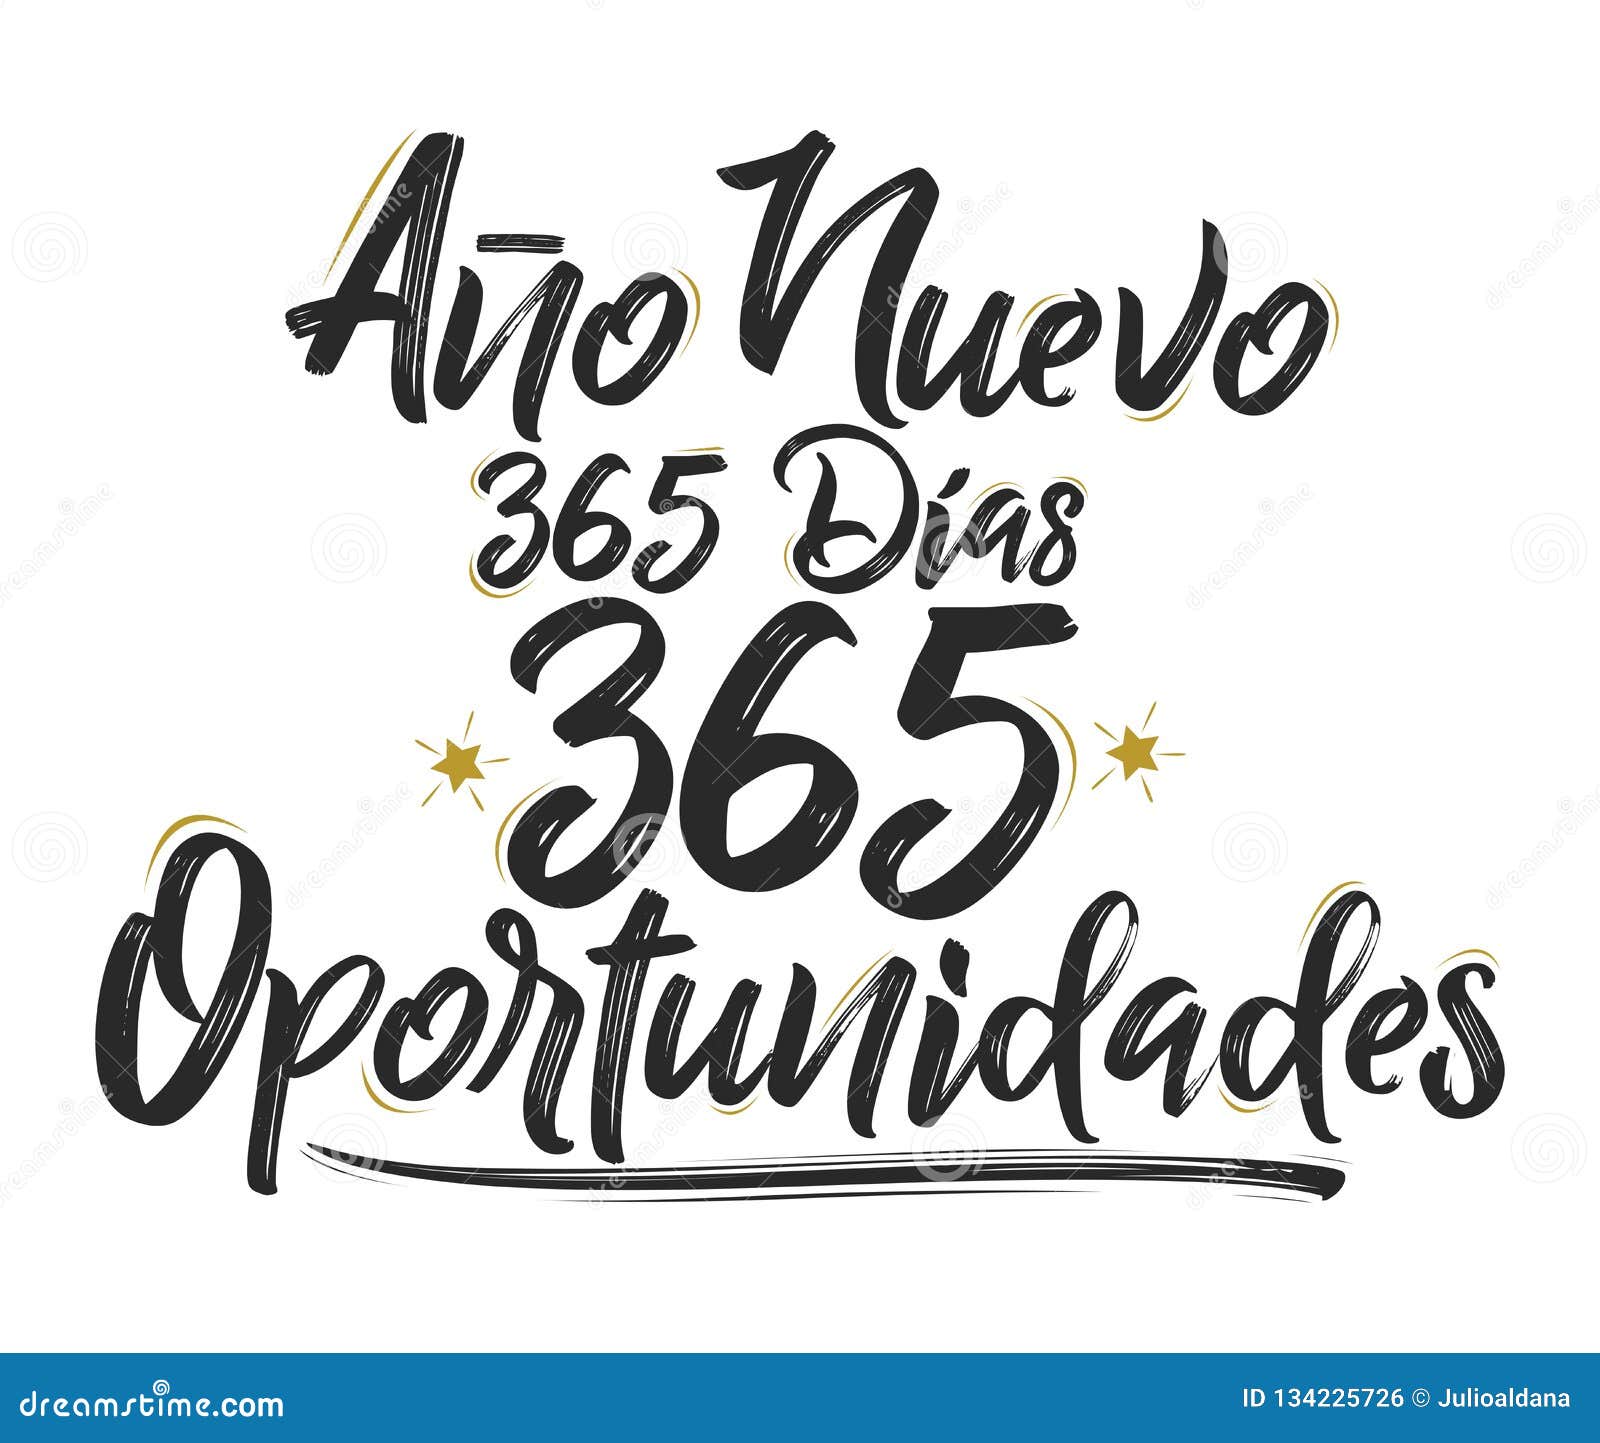 ano nuevo 365 dias, 365 oportunidades, new year 365 days, 365 opportunities spanish text